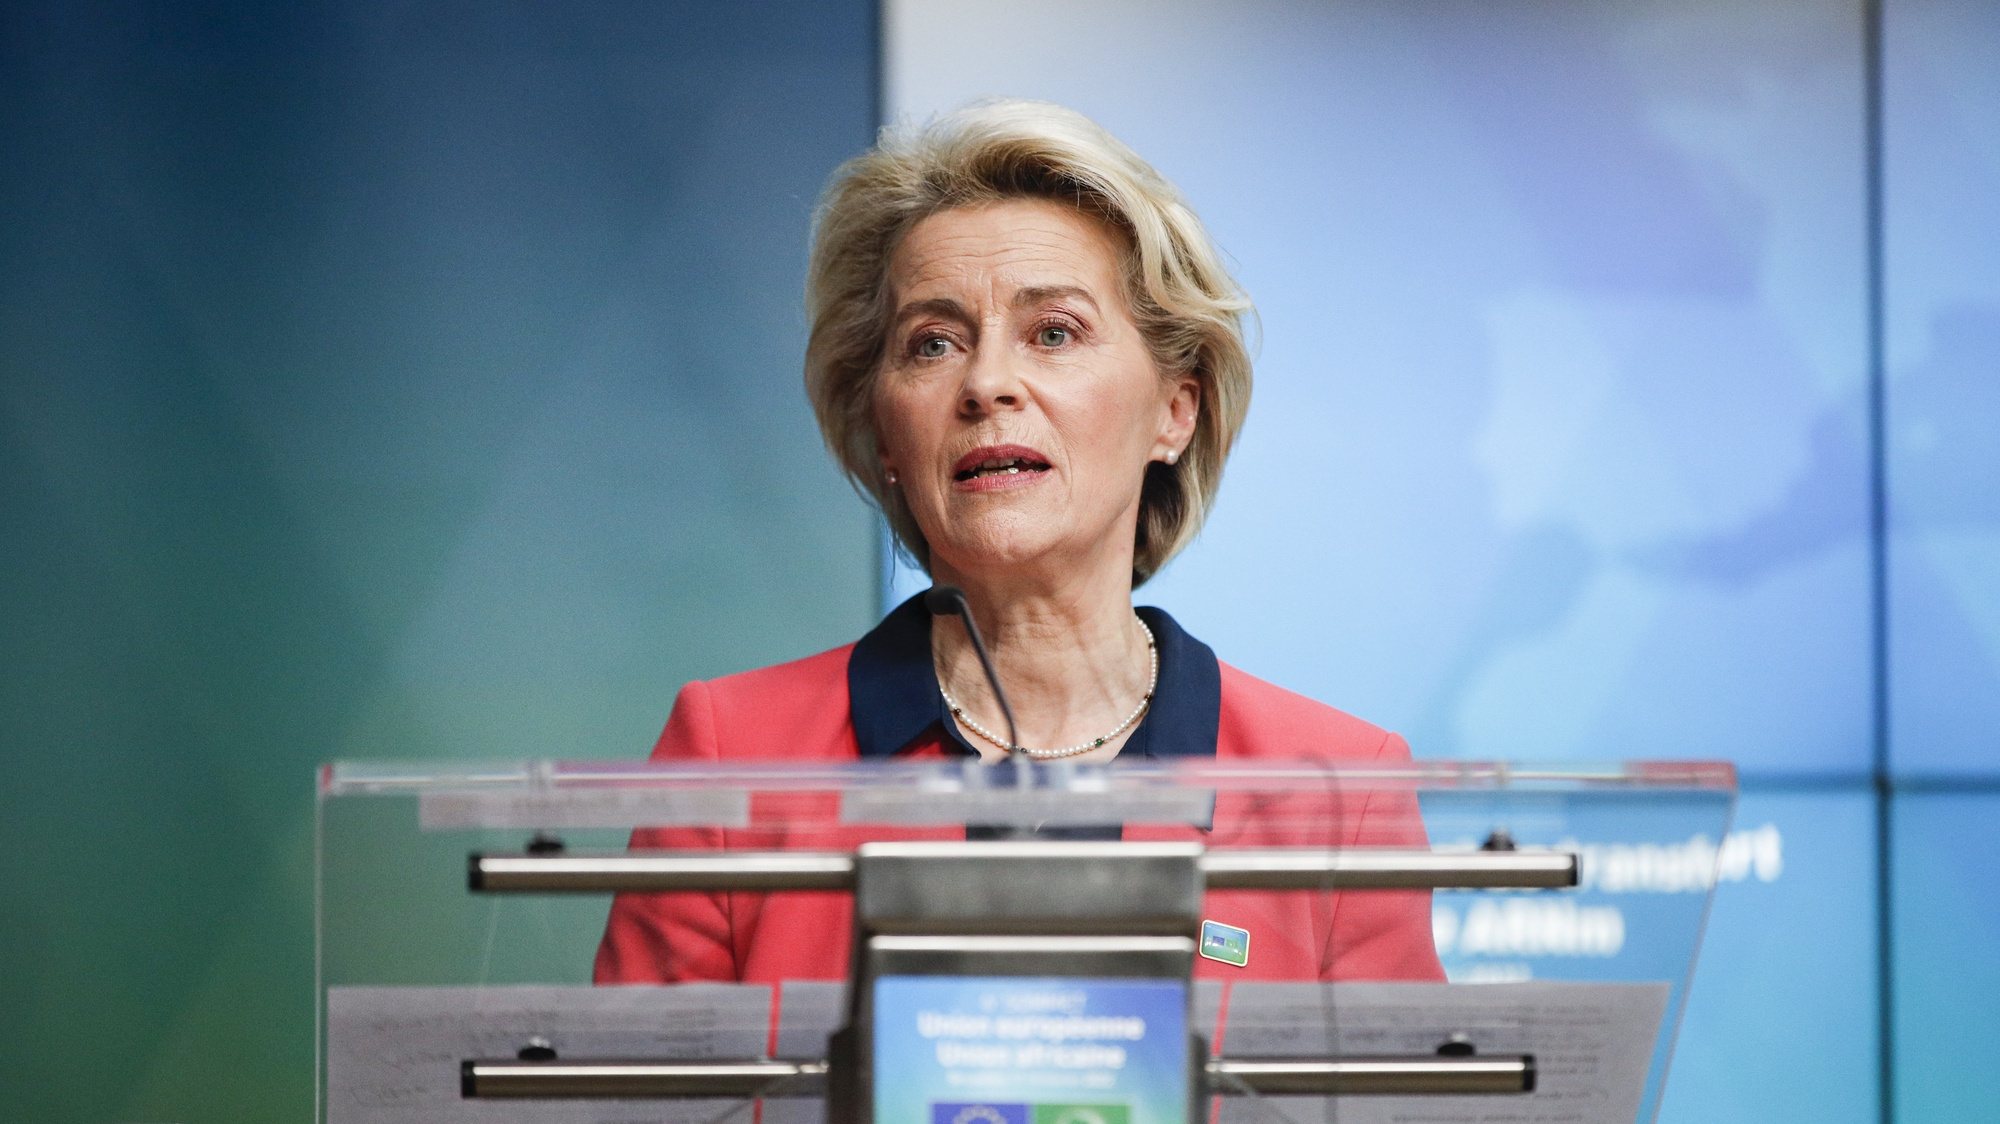 epa09768673 European Commission President Ursula von der Leyen delivers a statement about Covid-19 vaccination during an European Union - African Union summit in Brussels, Belgium, 18 February 2022.  EPA/JOHANNA GERON / POOL